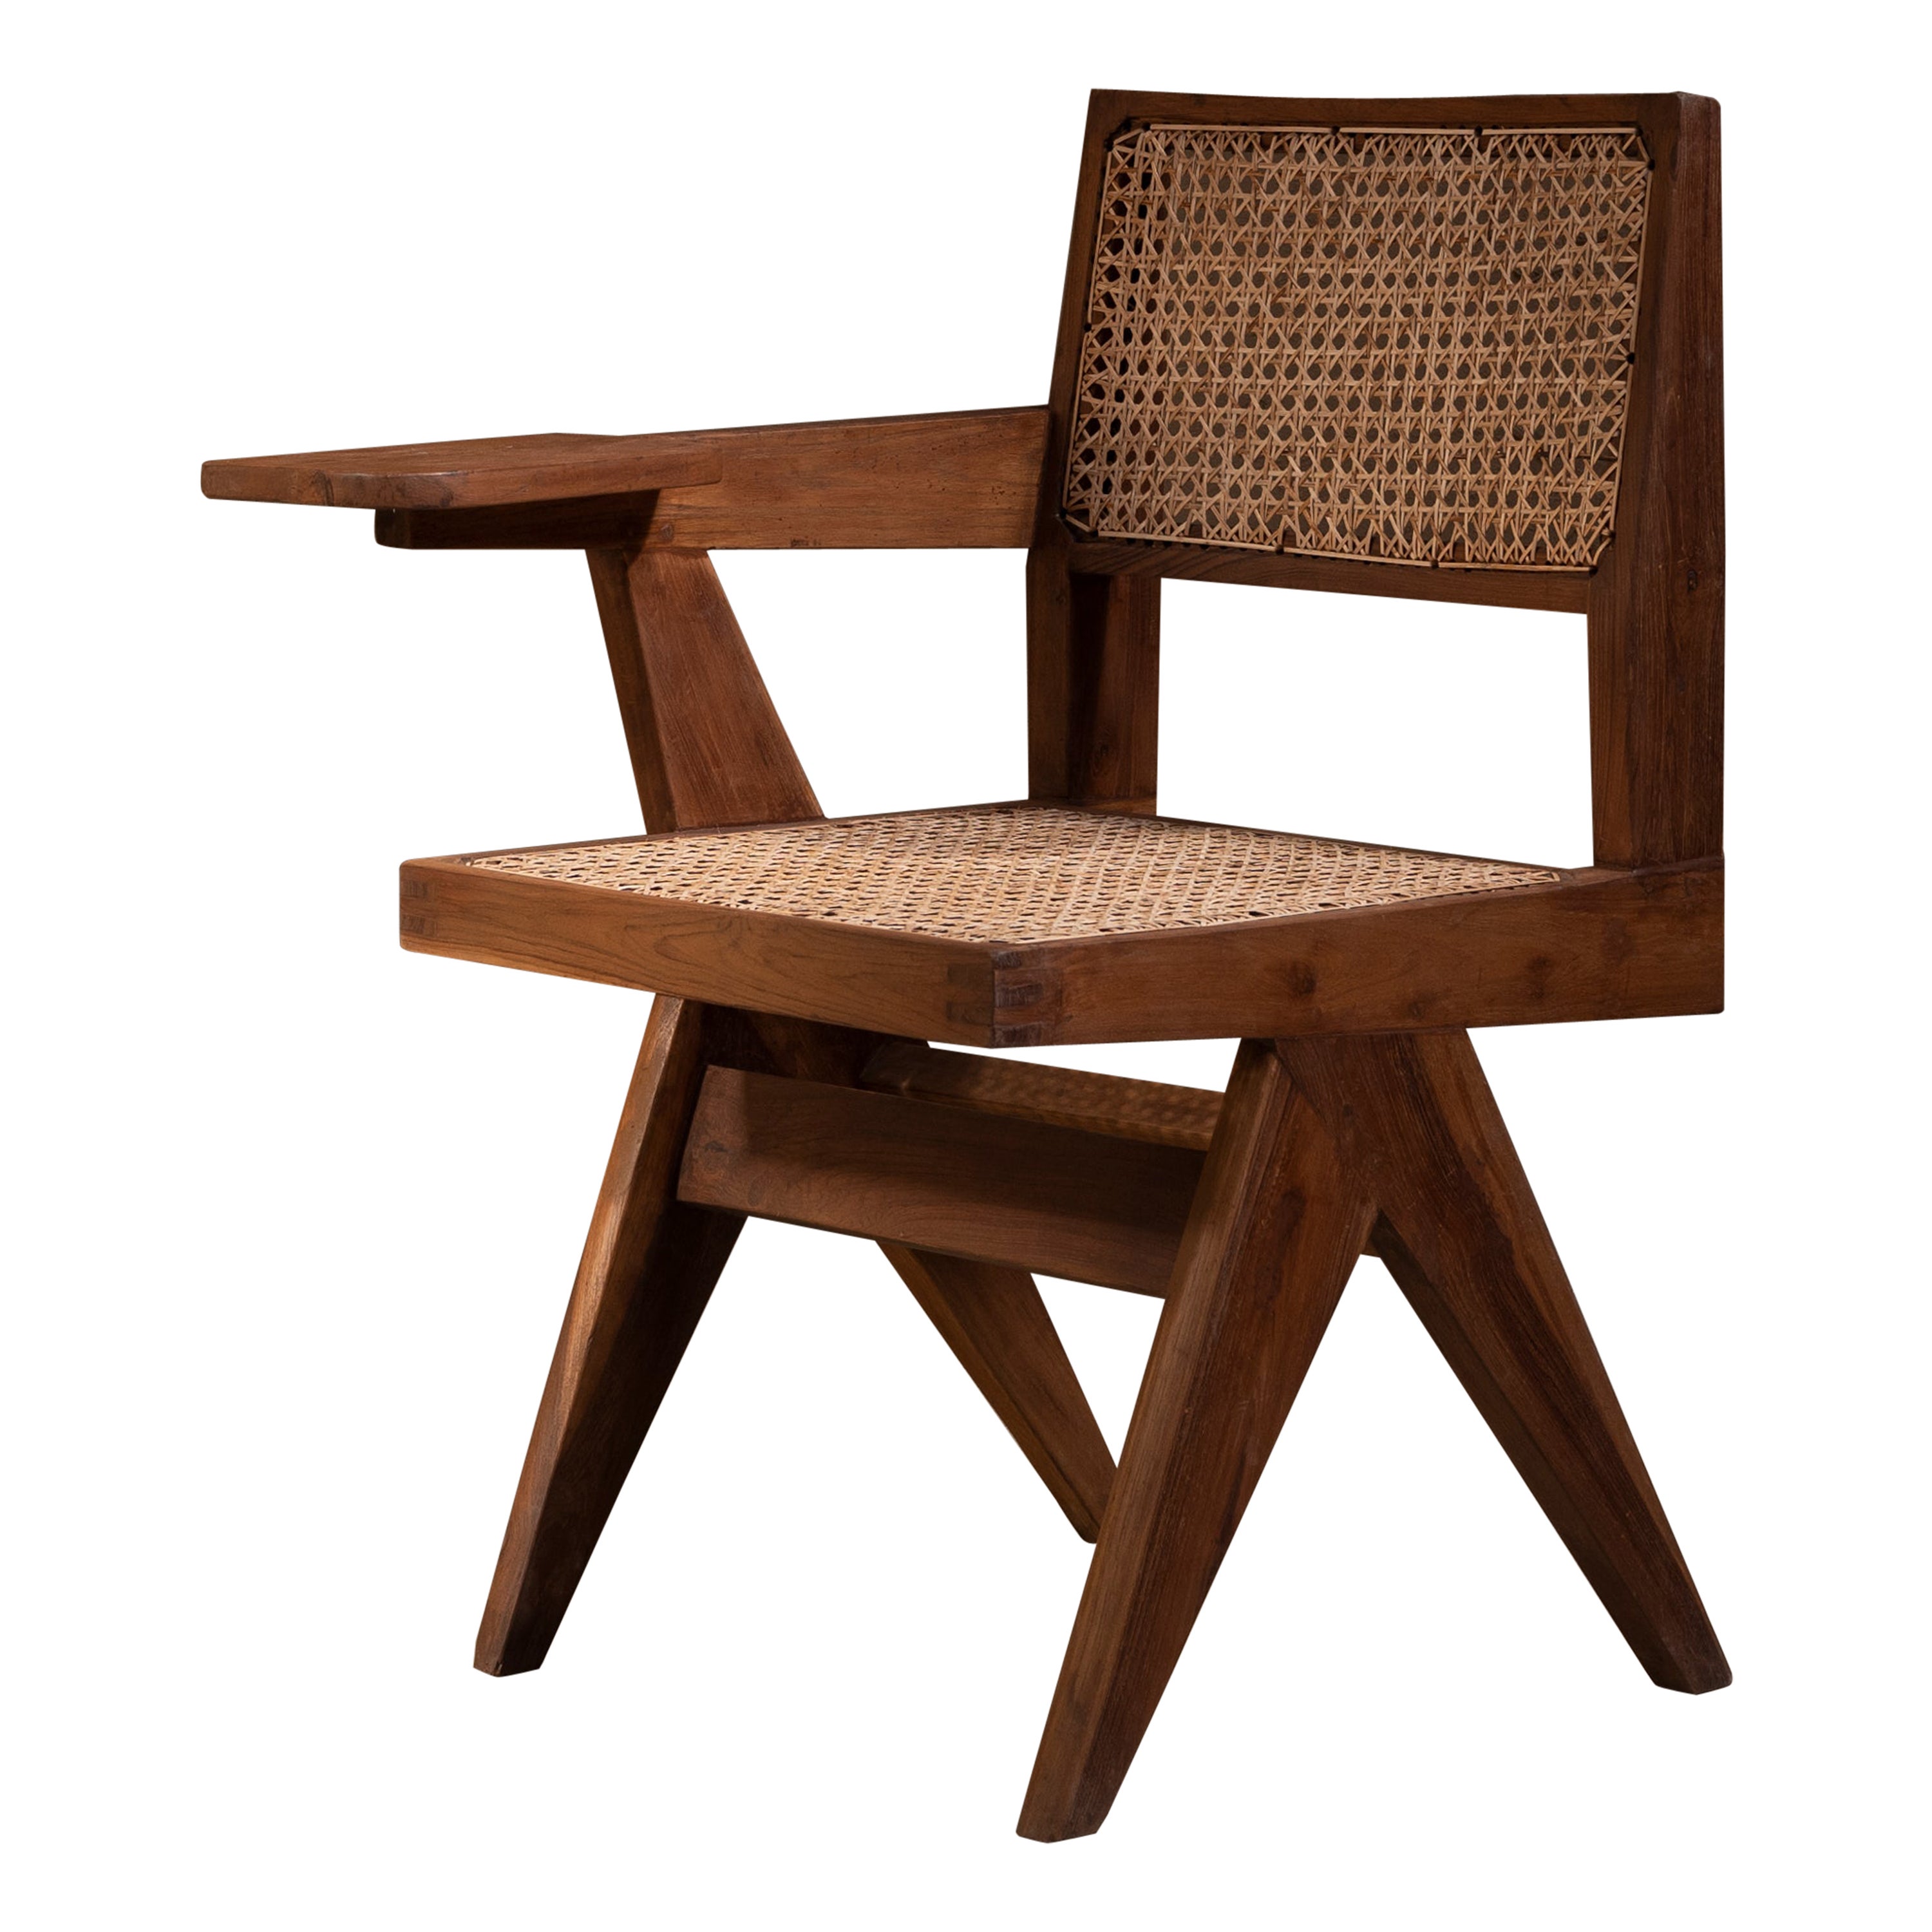 Pierre Jeanneret, Writing Chair, Circa 1960s, Chandigarh, India